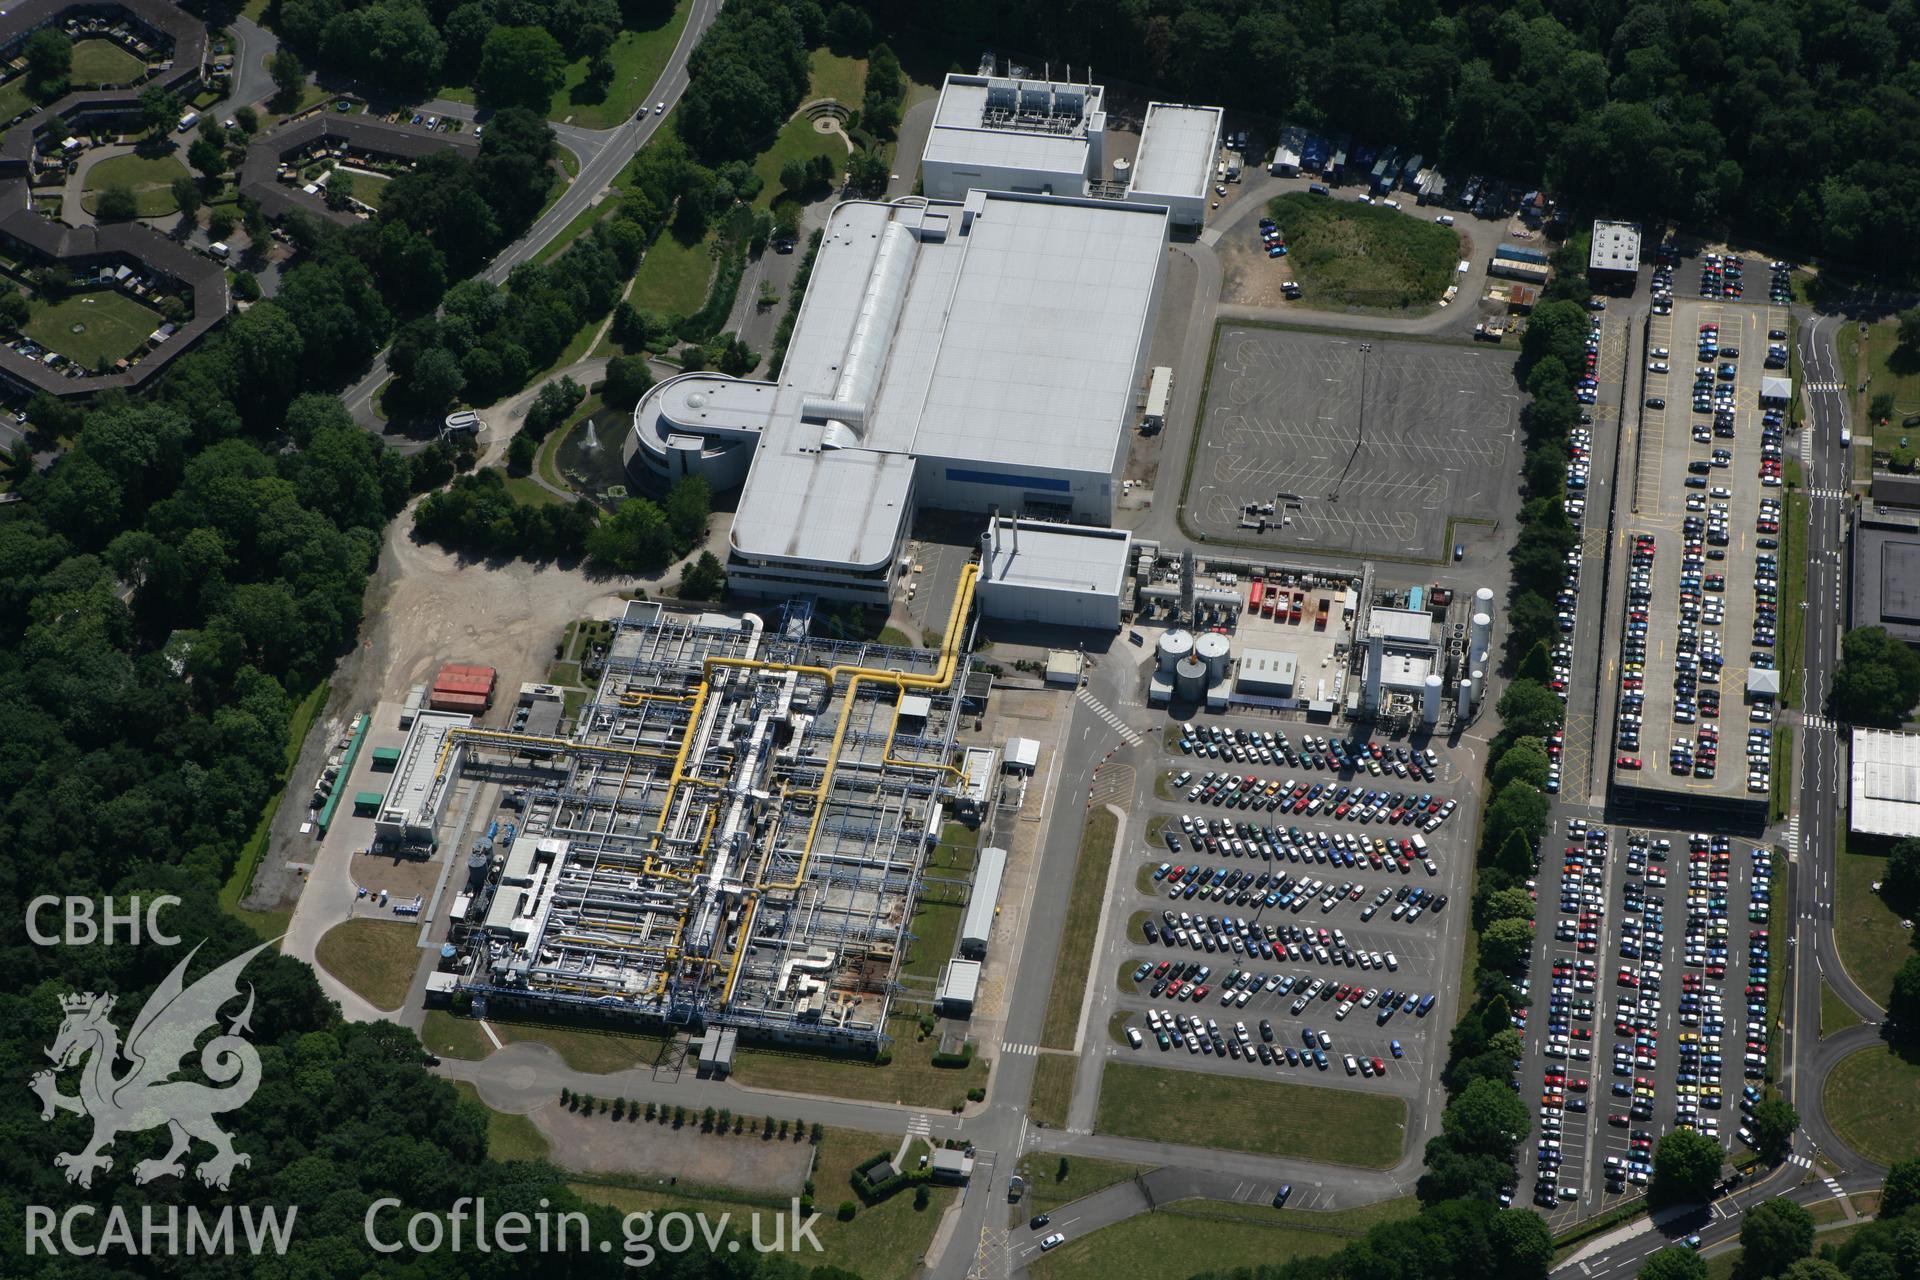 RCAHMW colour oblique photograph of Inmos Factory, Semiconductor Plant, Newport. Taken by Toby Driver on 21/06/2010.